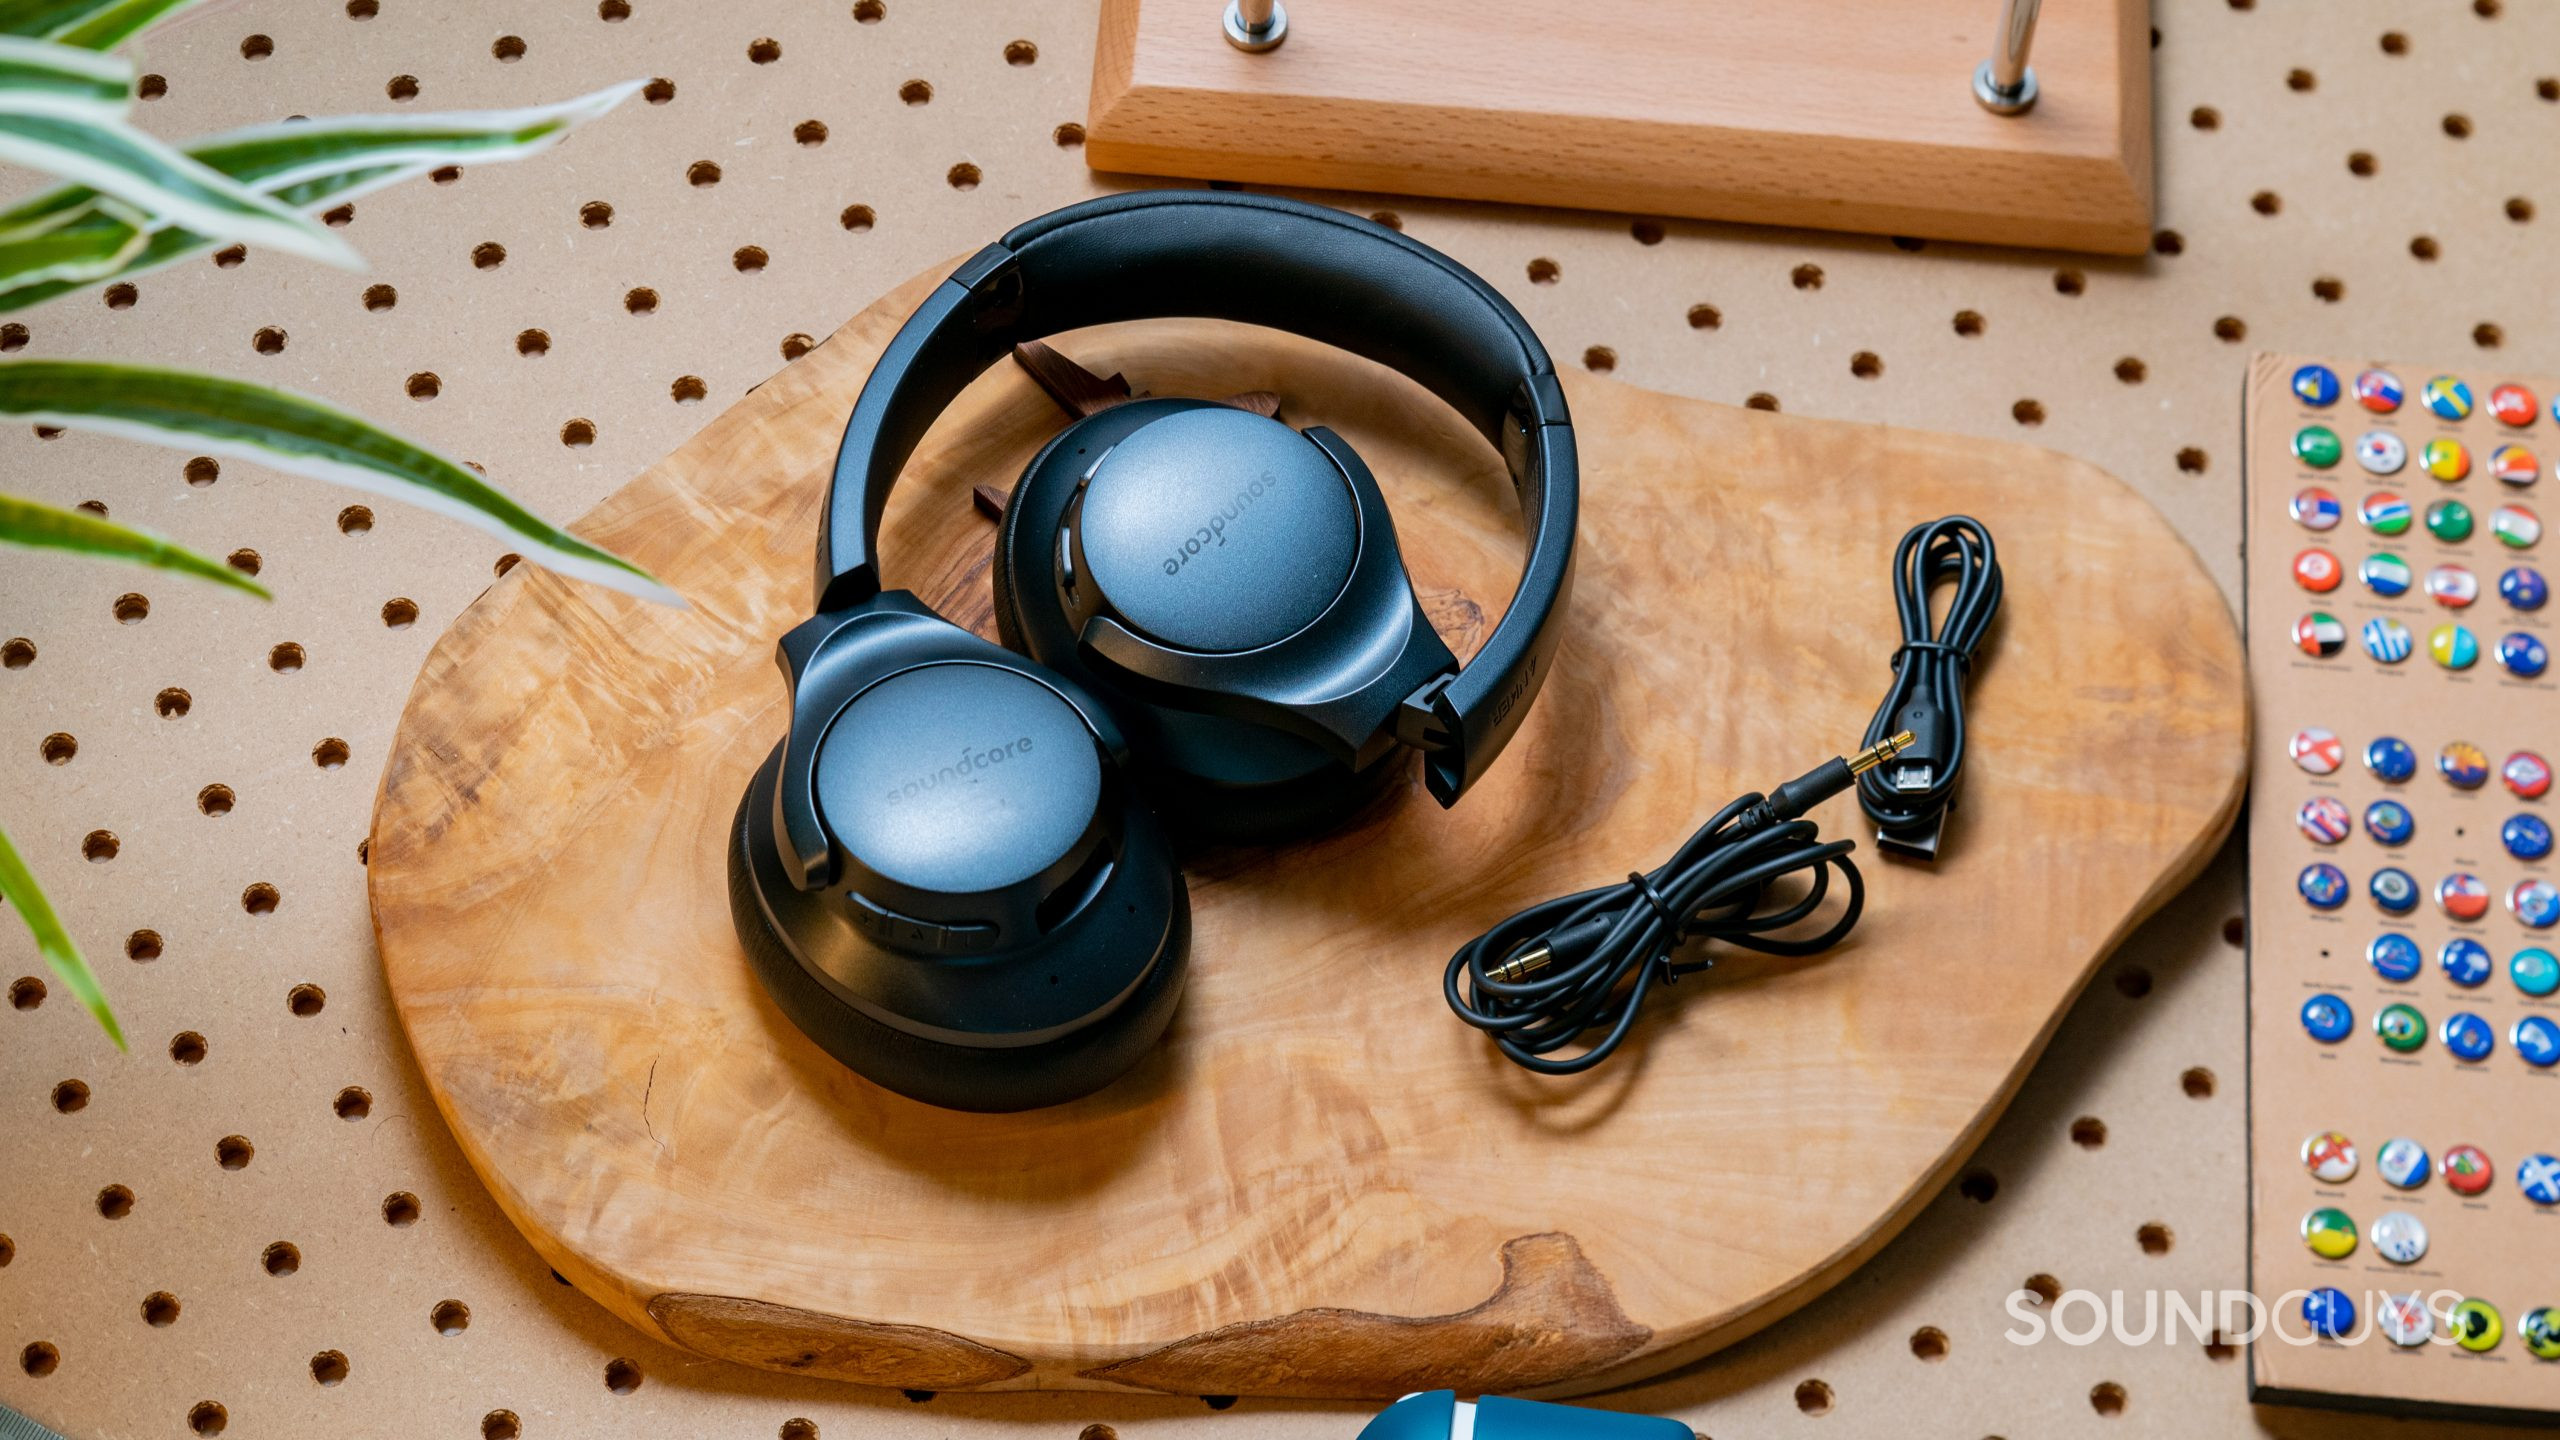 The Anker Soundcore Life Q20 wireless noise canceling headphones folded up on a wooden surface next to the included cables.